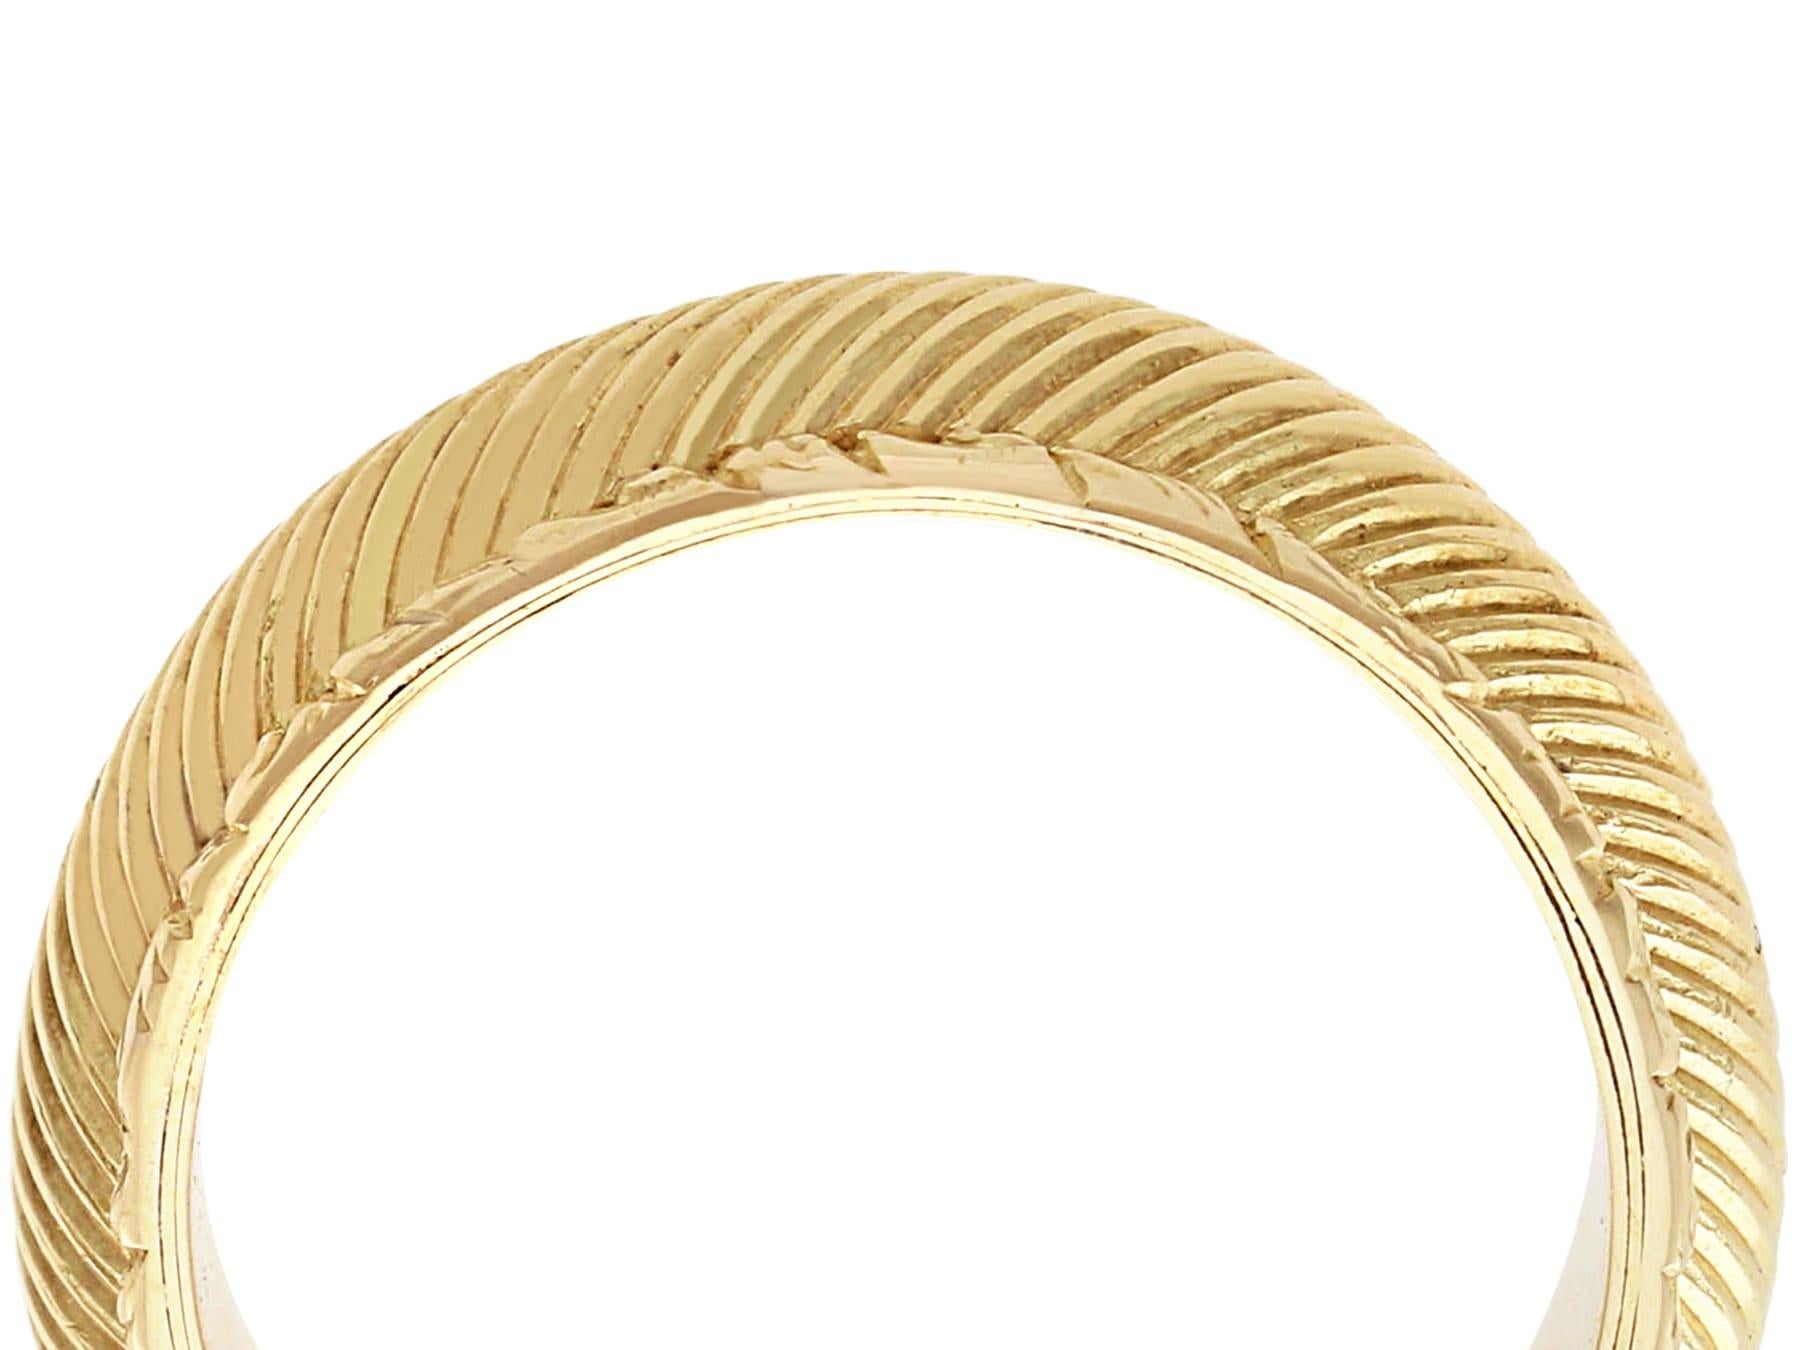 Antique 14k Yellow Gold Wedding Band / Ring Circa 1820 In Excellent Condition For Sale In Jesmond, Newcastle Upon Tyne